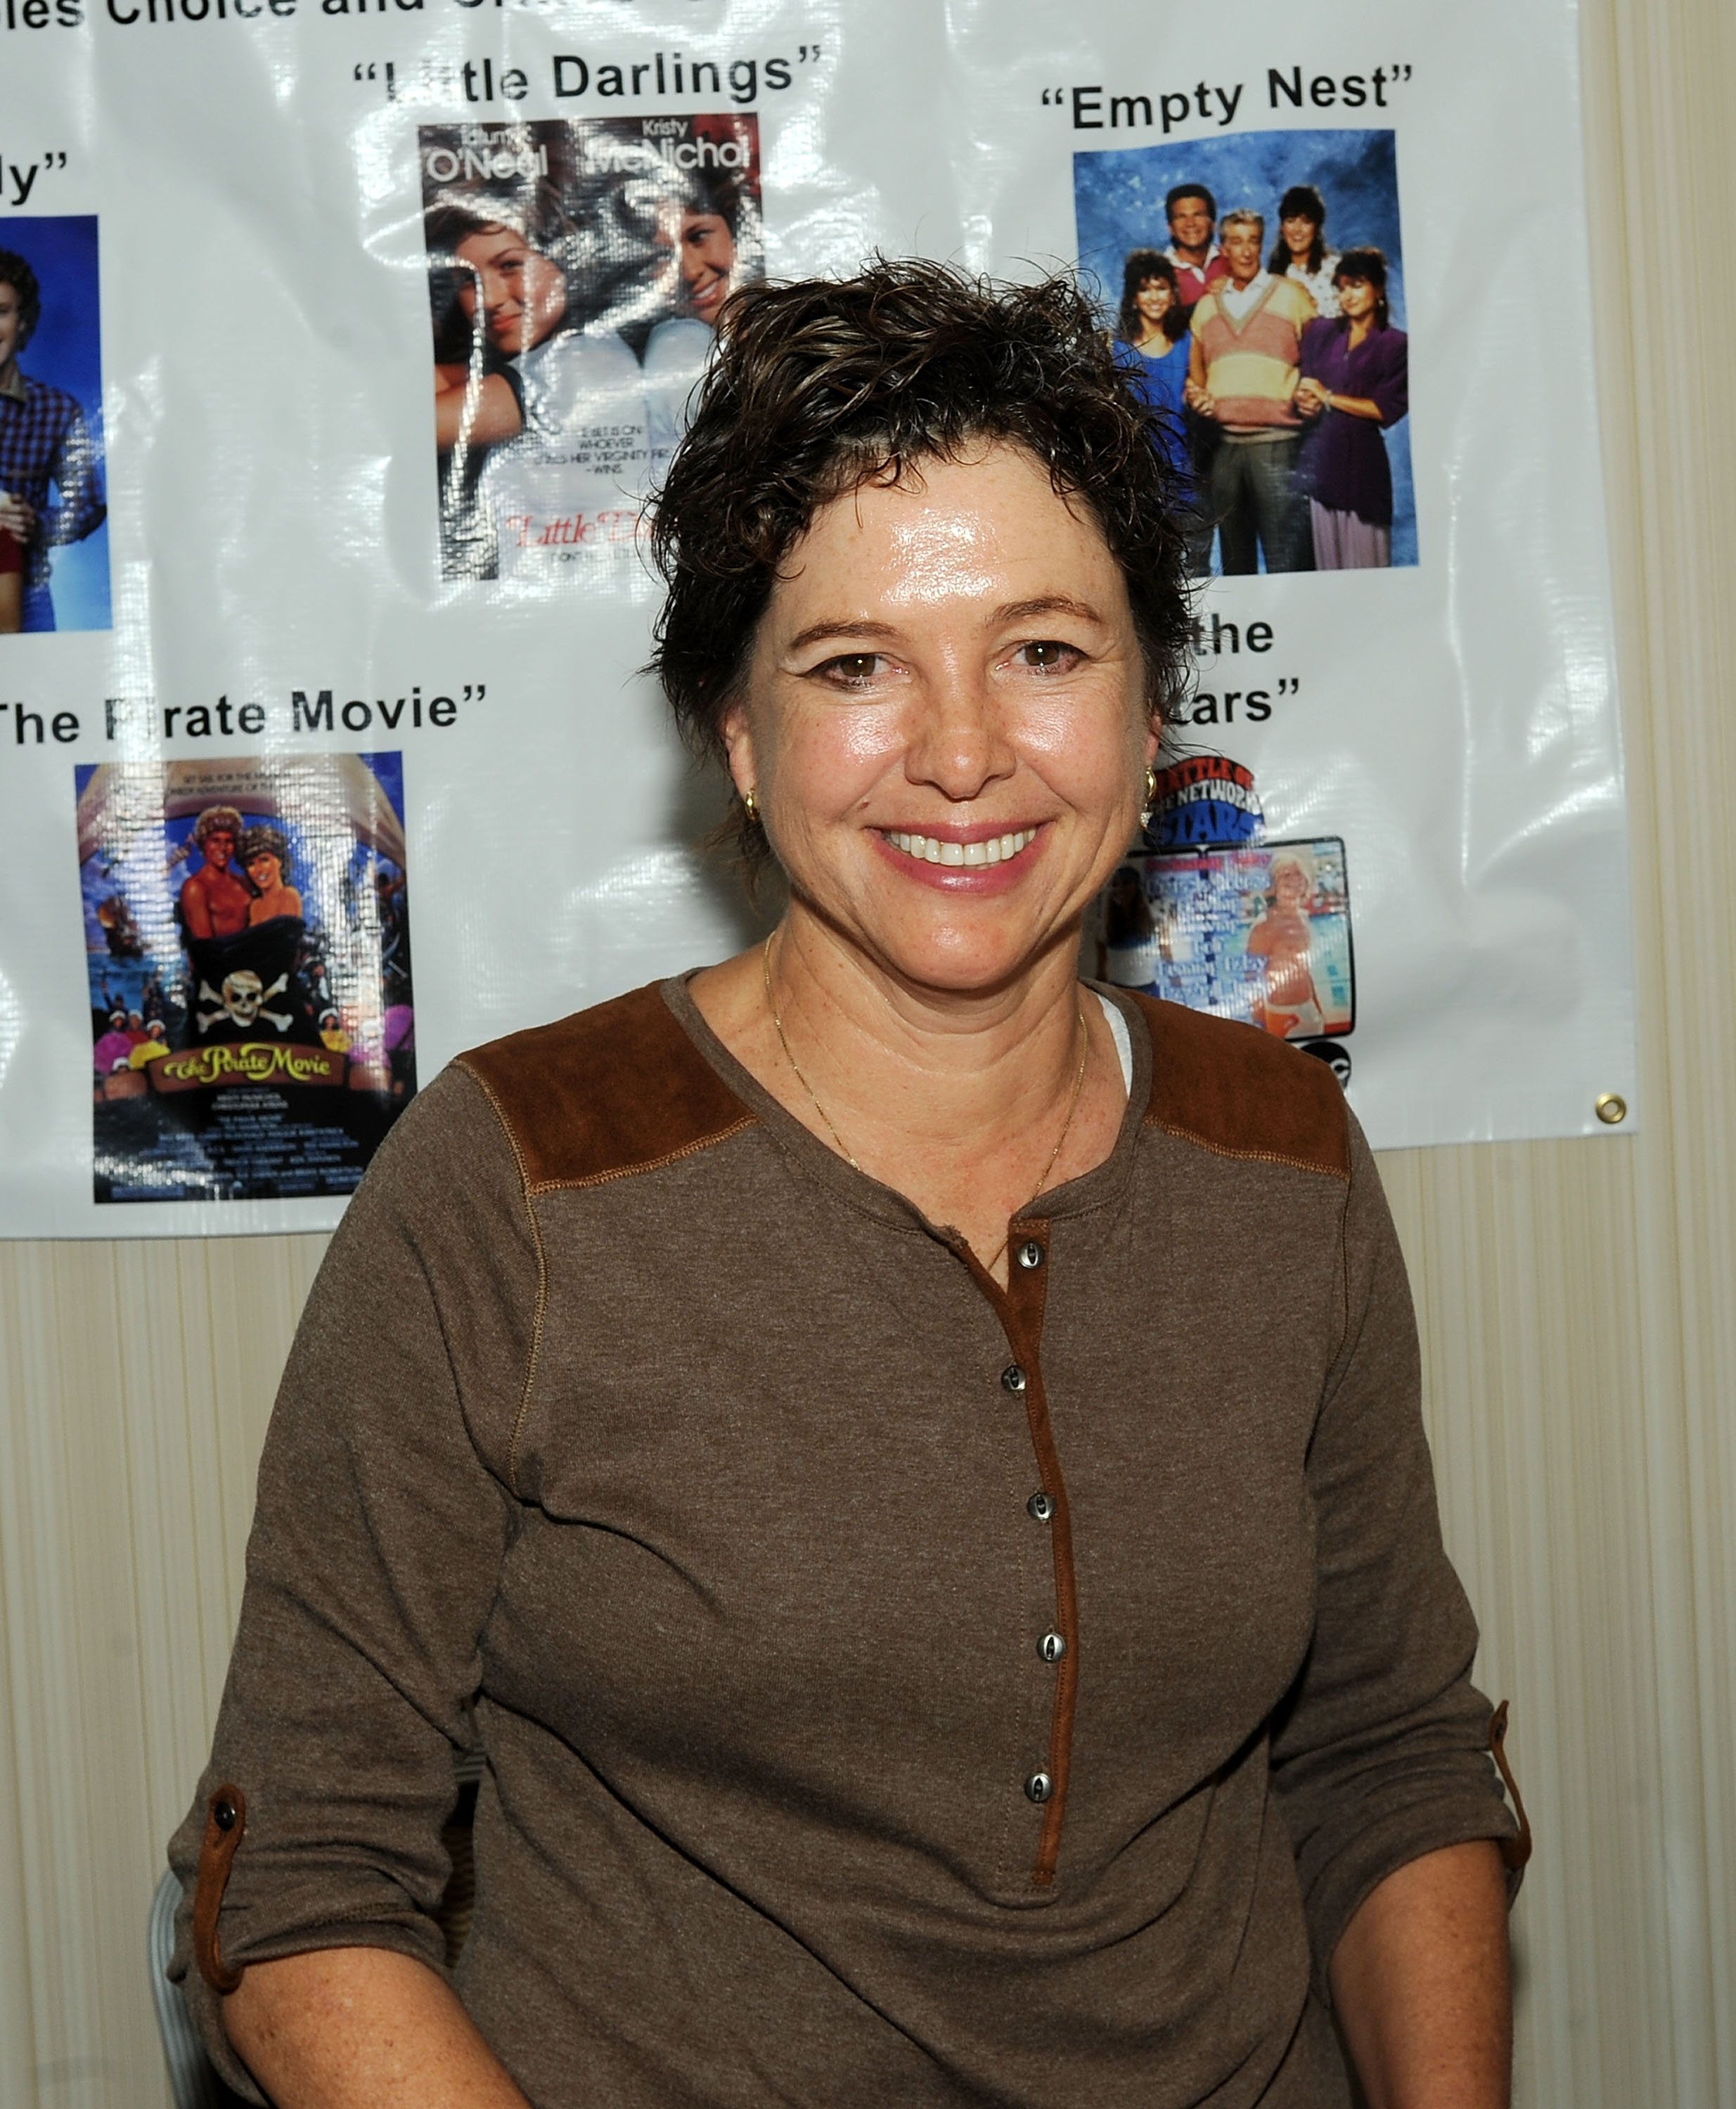 Kristy McNichol at the Chiller Theatre Expo on October 24, 2014, in Parsippany, New Jersey. | Source: Bobby Bank/WireImage/Getty Images